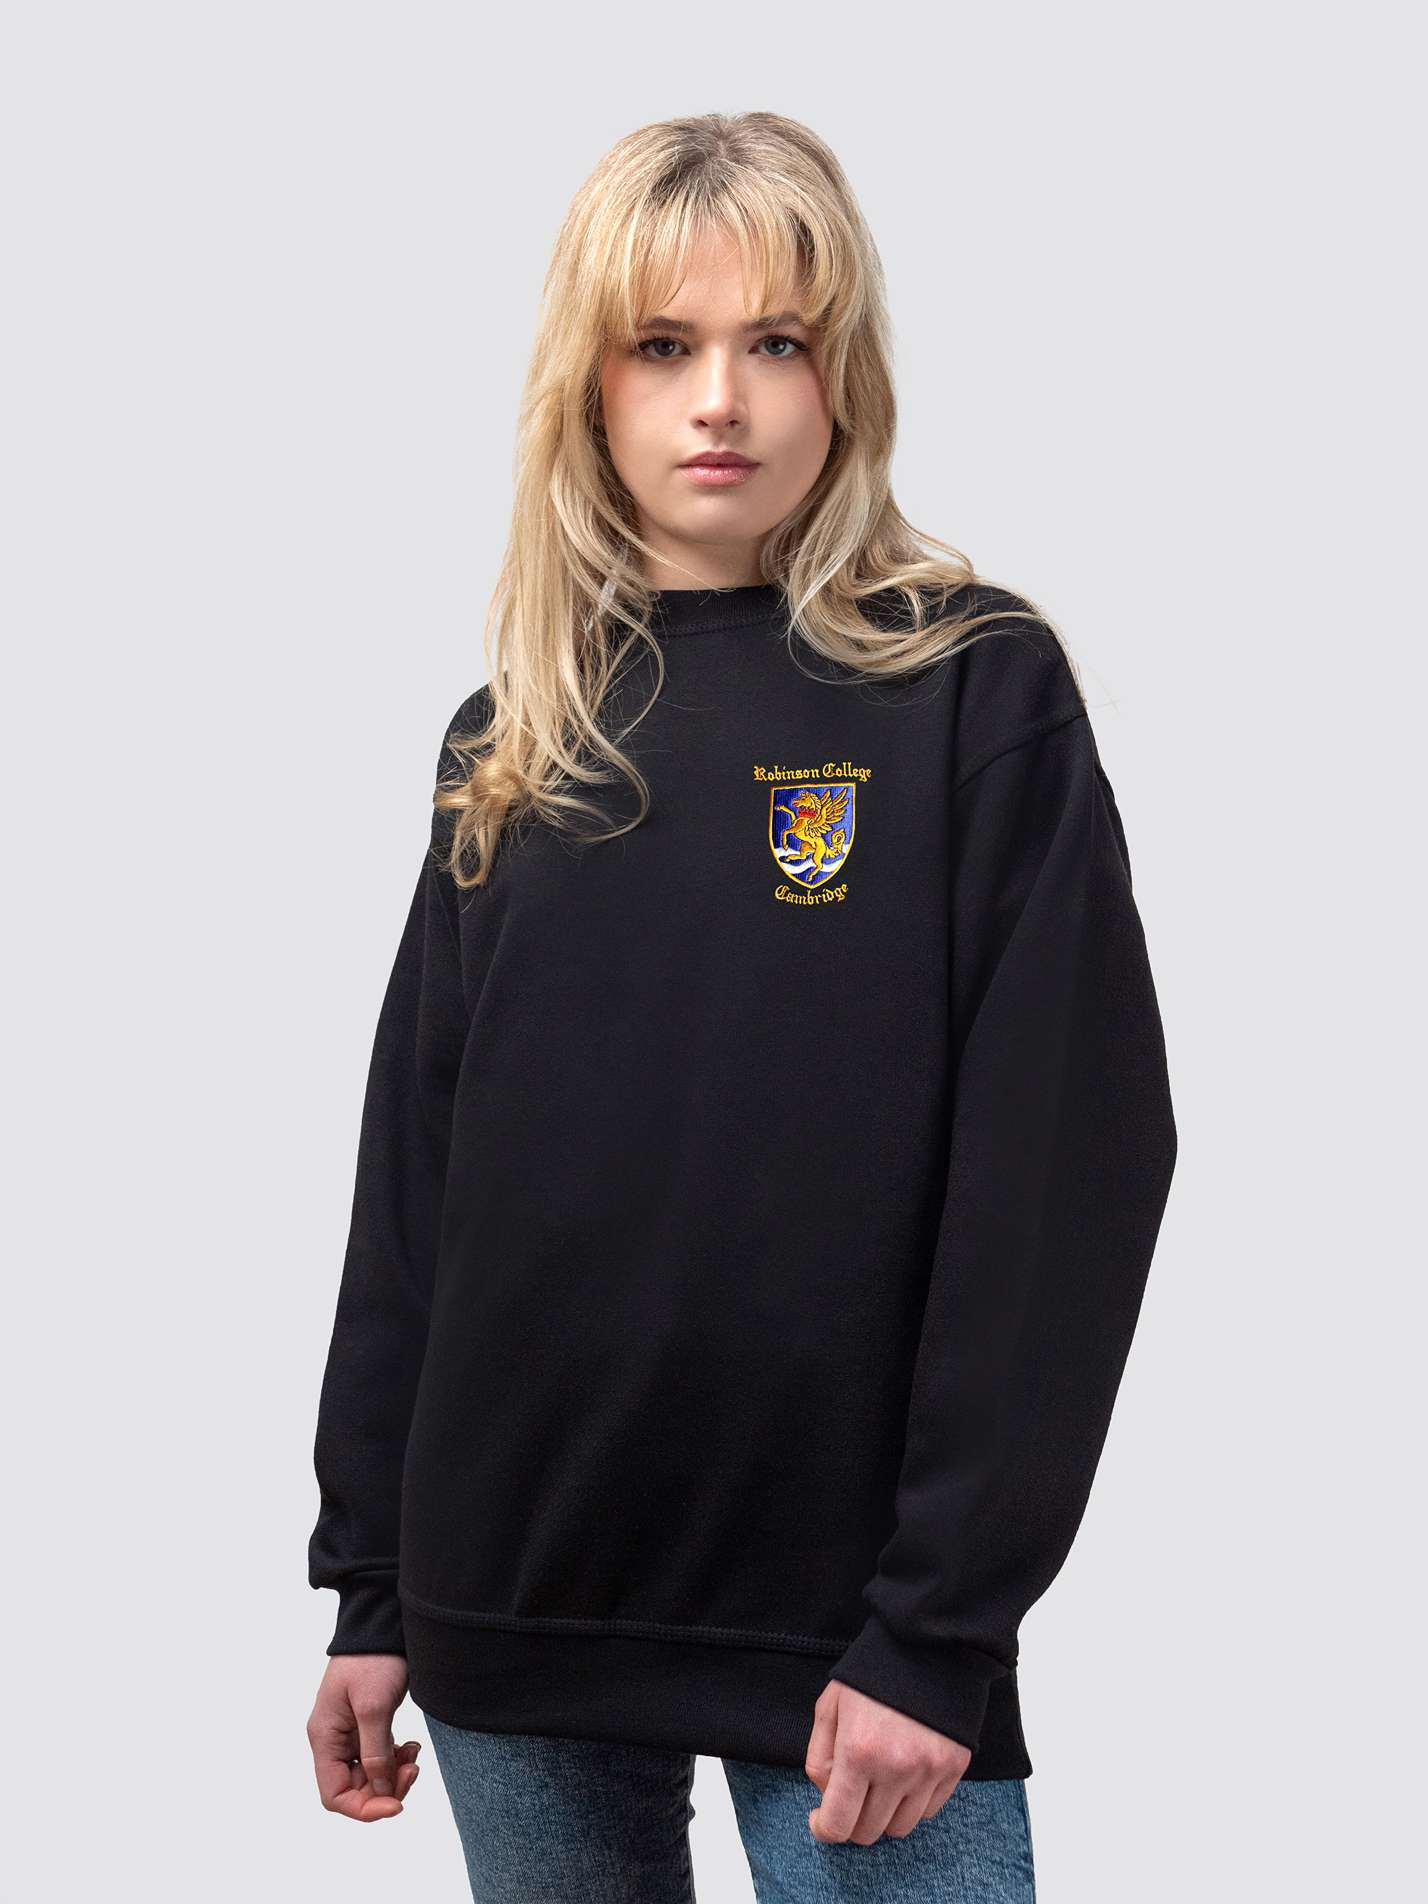 Robinson crest on the front of a black, crew-neck sweatshirt